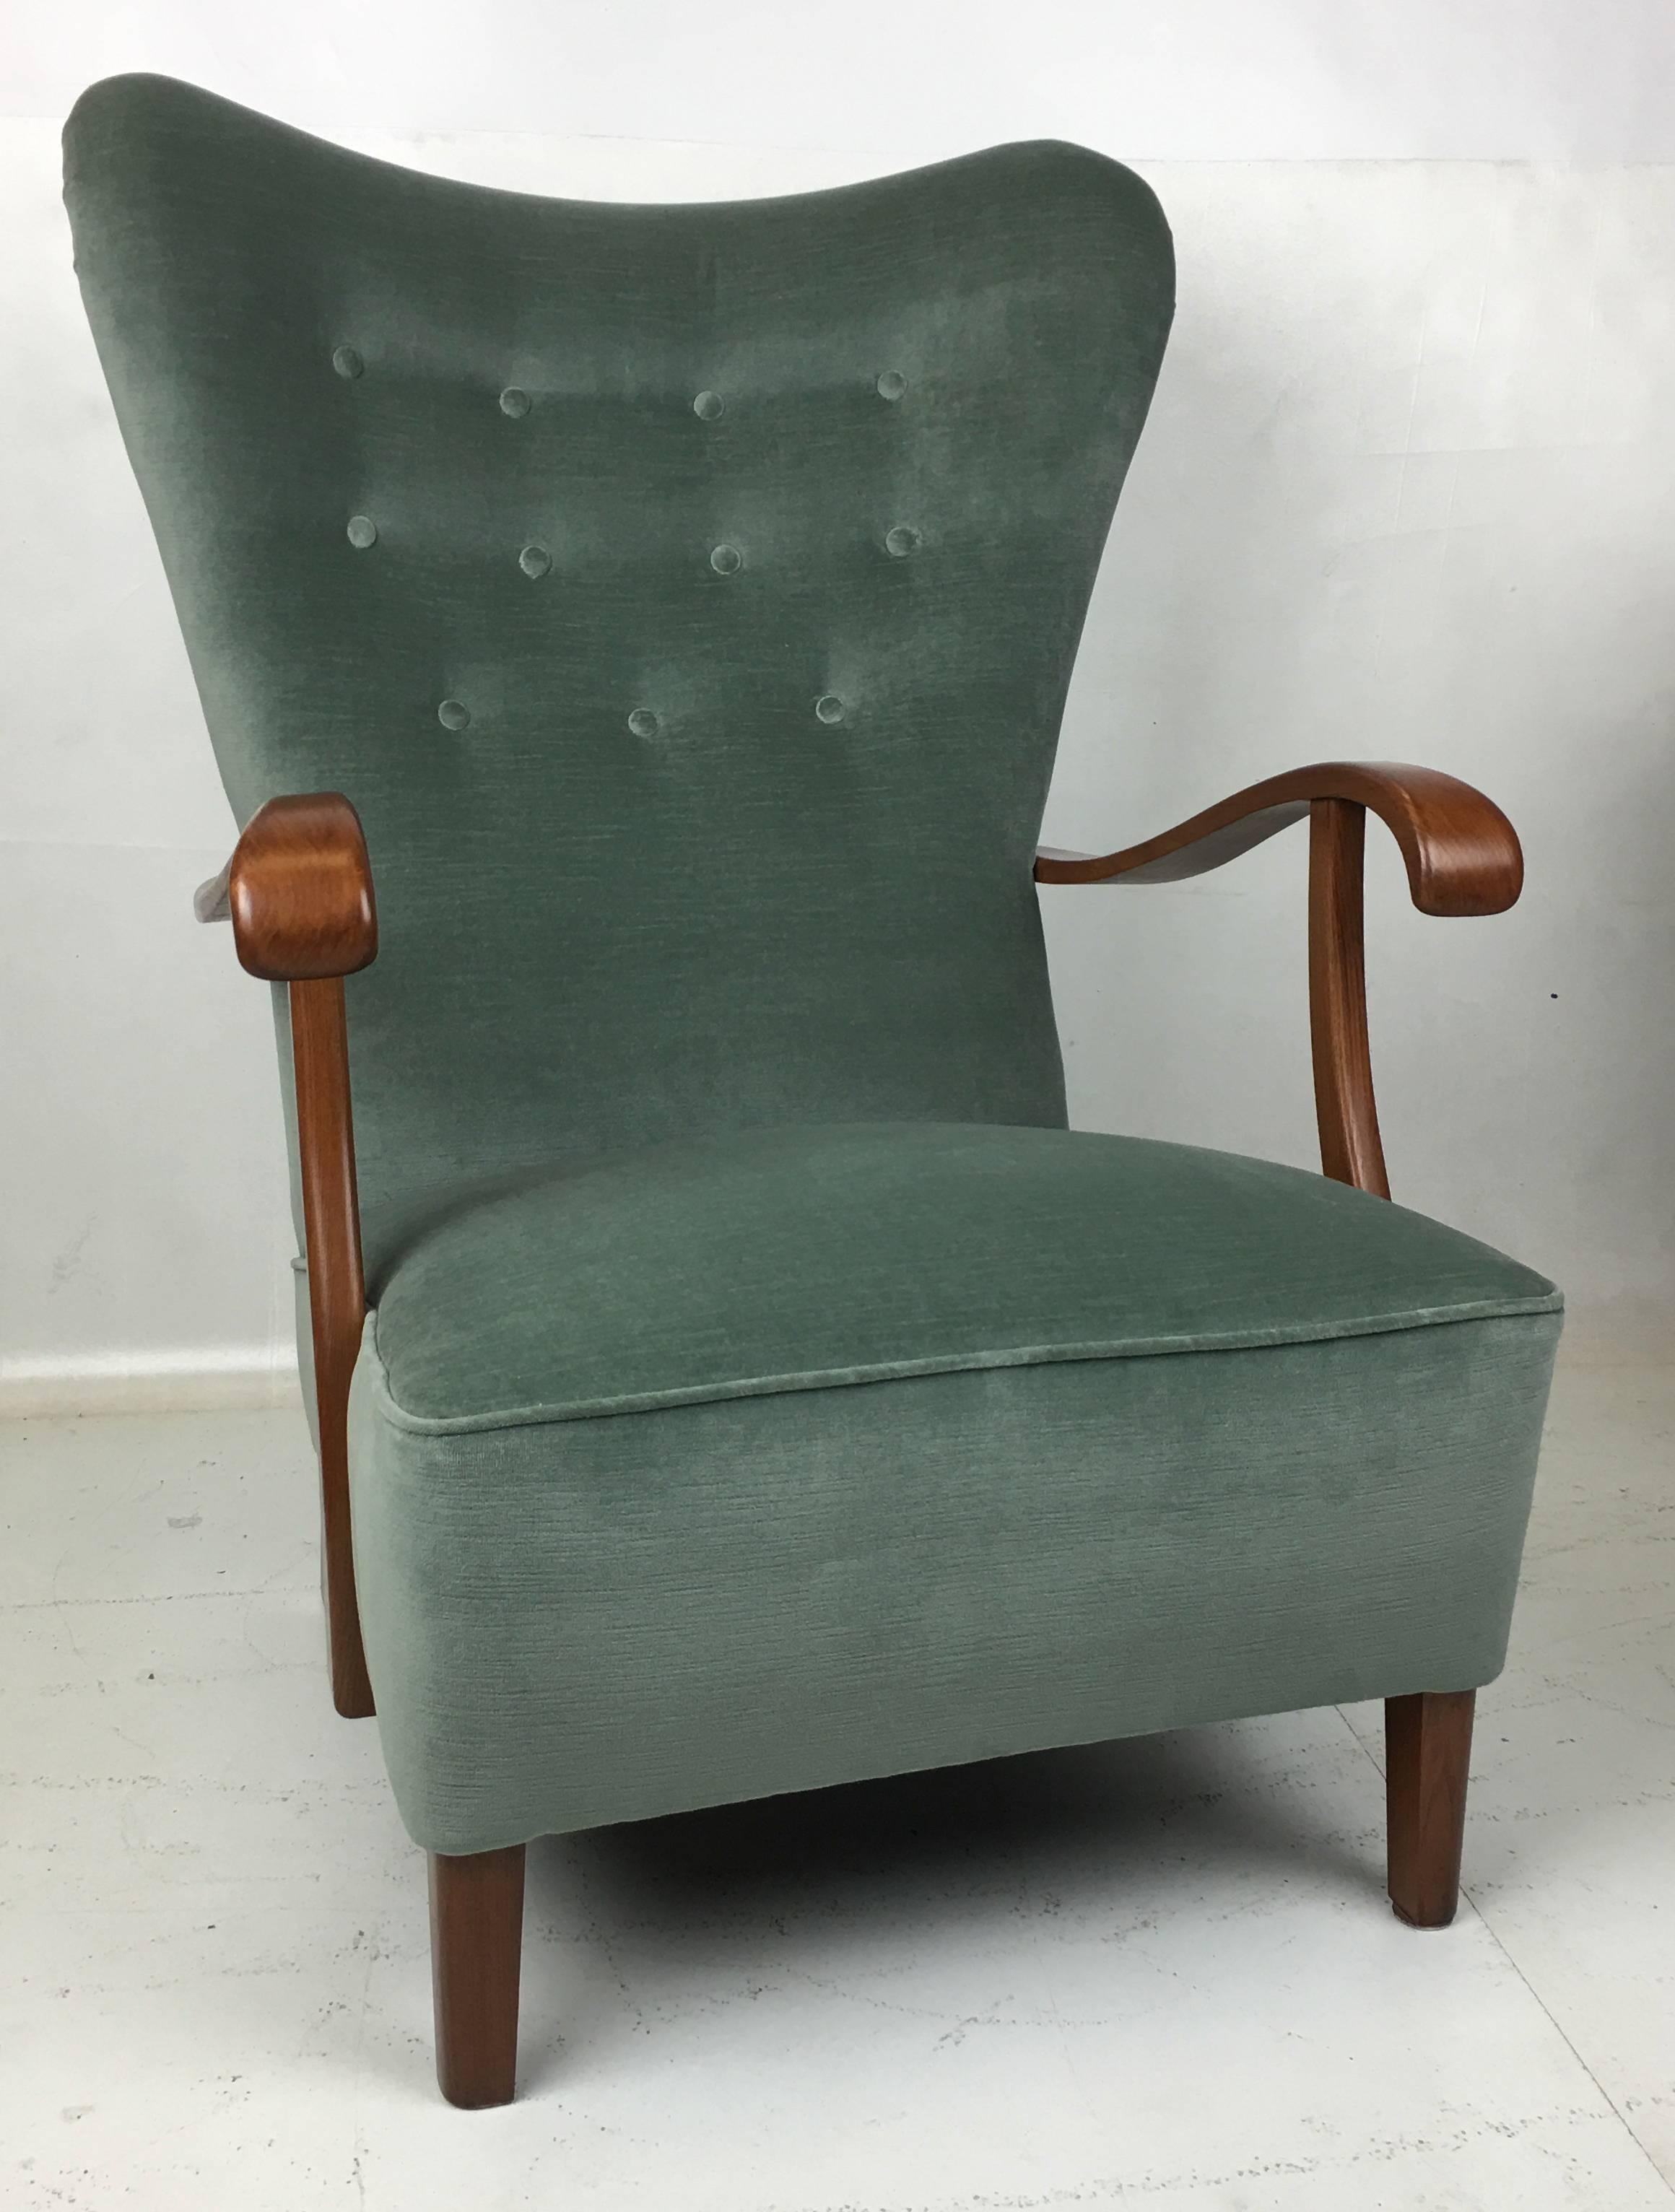 Handsome Wing chair with swooping arms and purposeful legs. The chair has been meticulously restored from the ground up; refinished, reglued, new webbing, 8-way hand tied springs, new foam and has been freshly reupholstered in luxurious heavyweight